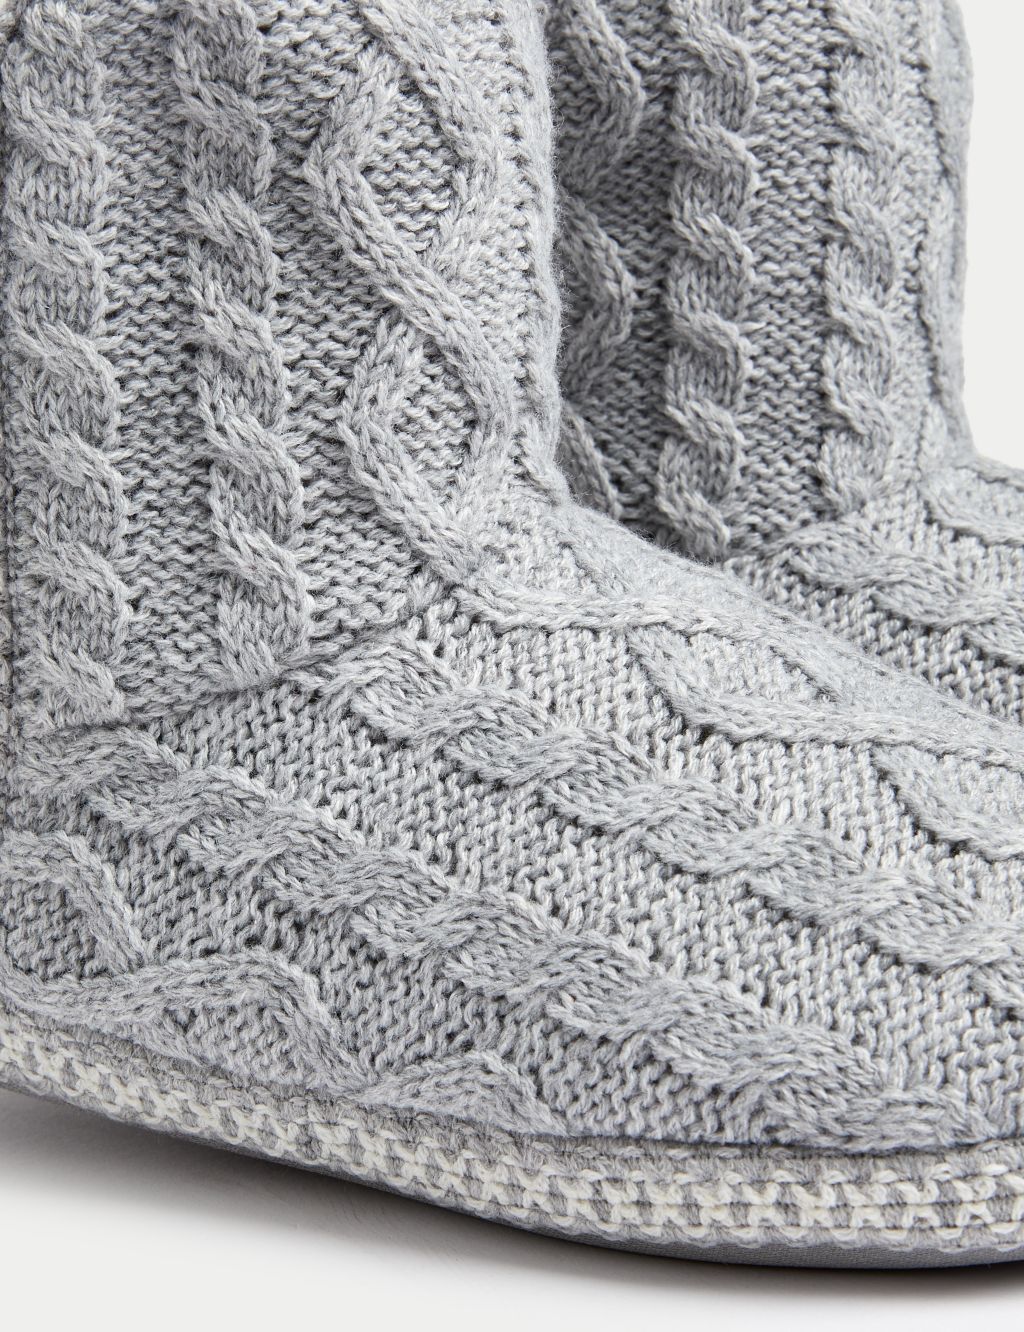 Cable Knit Slipper Boots image 3